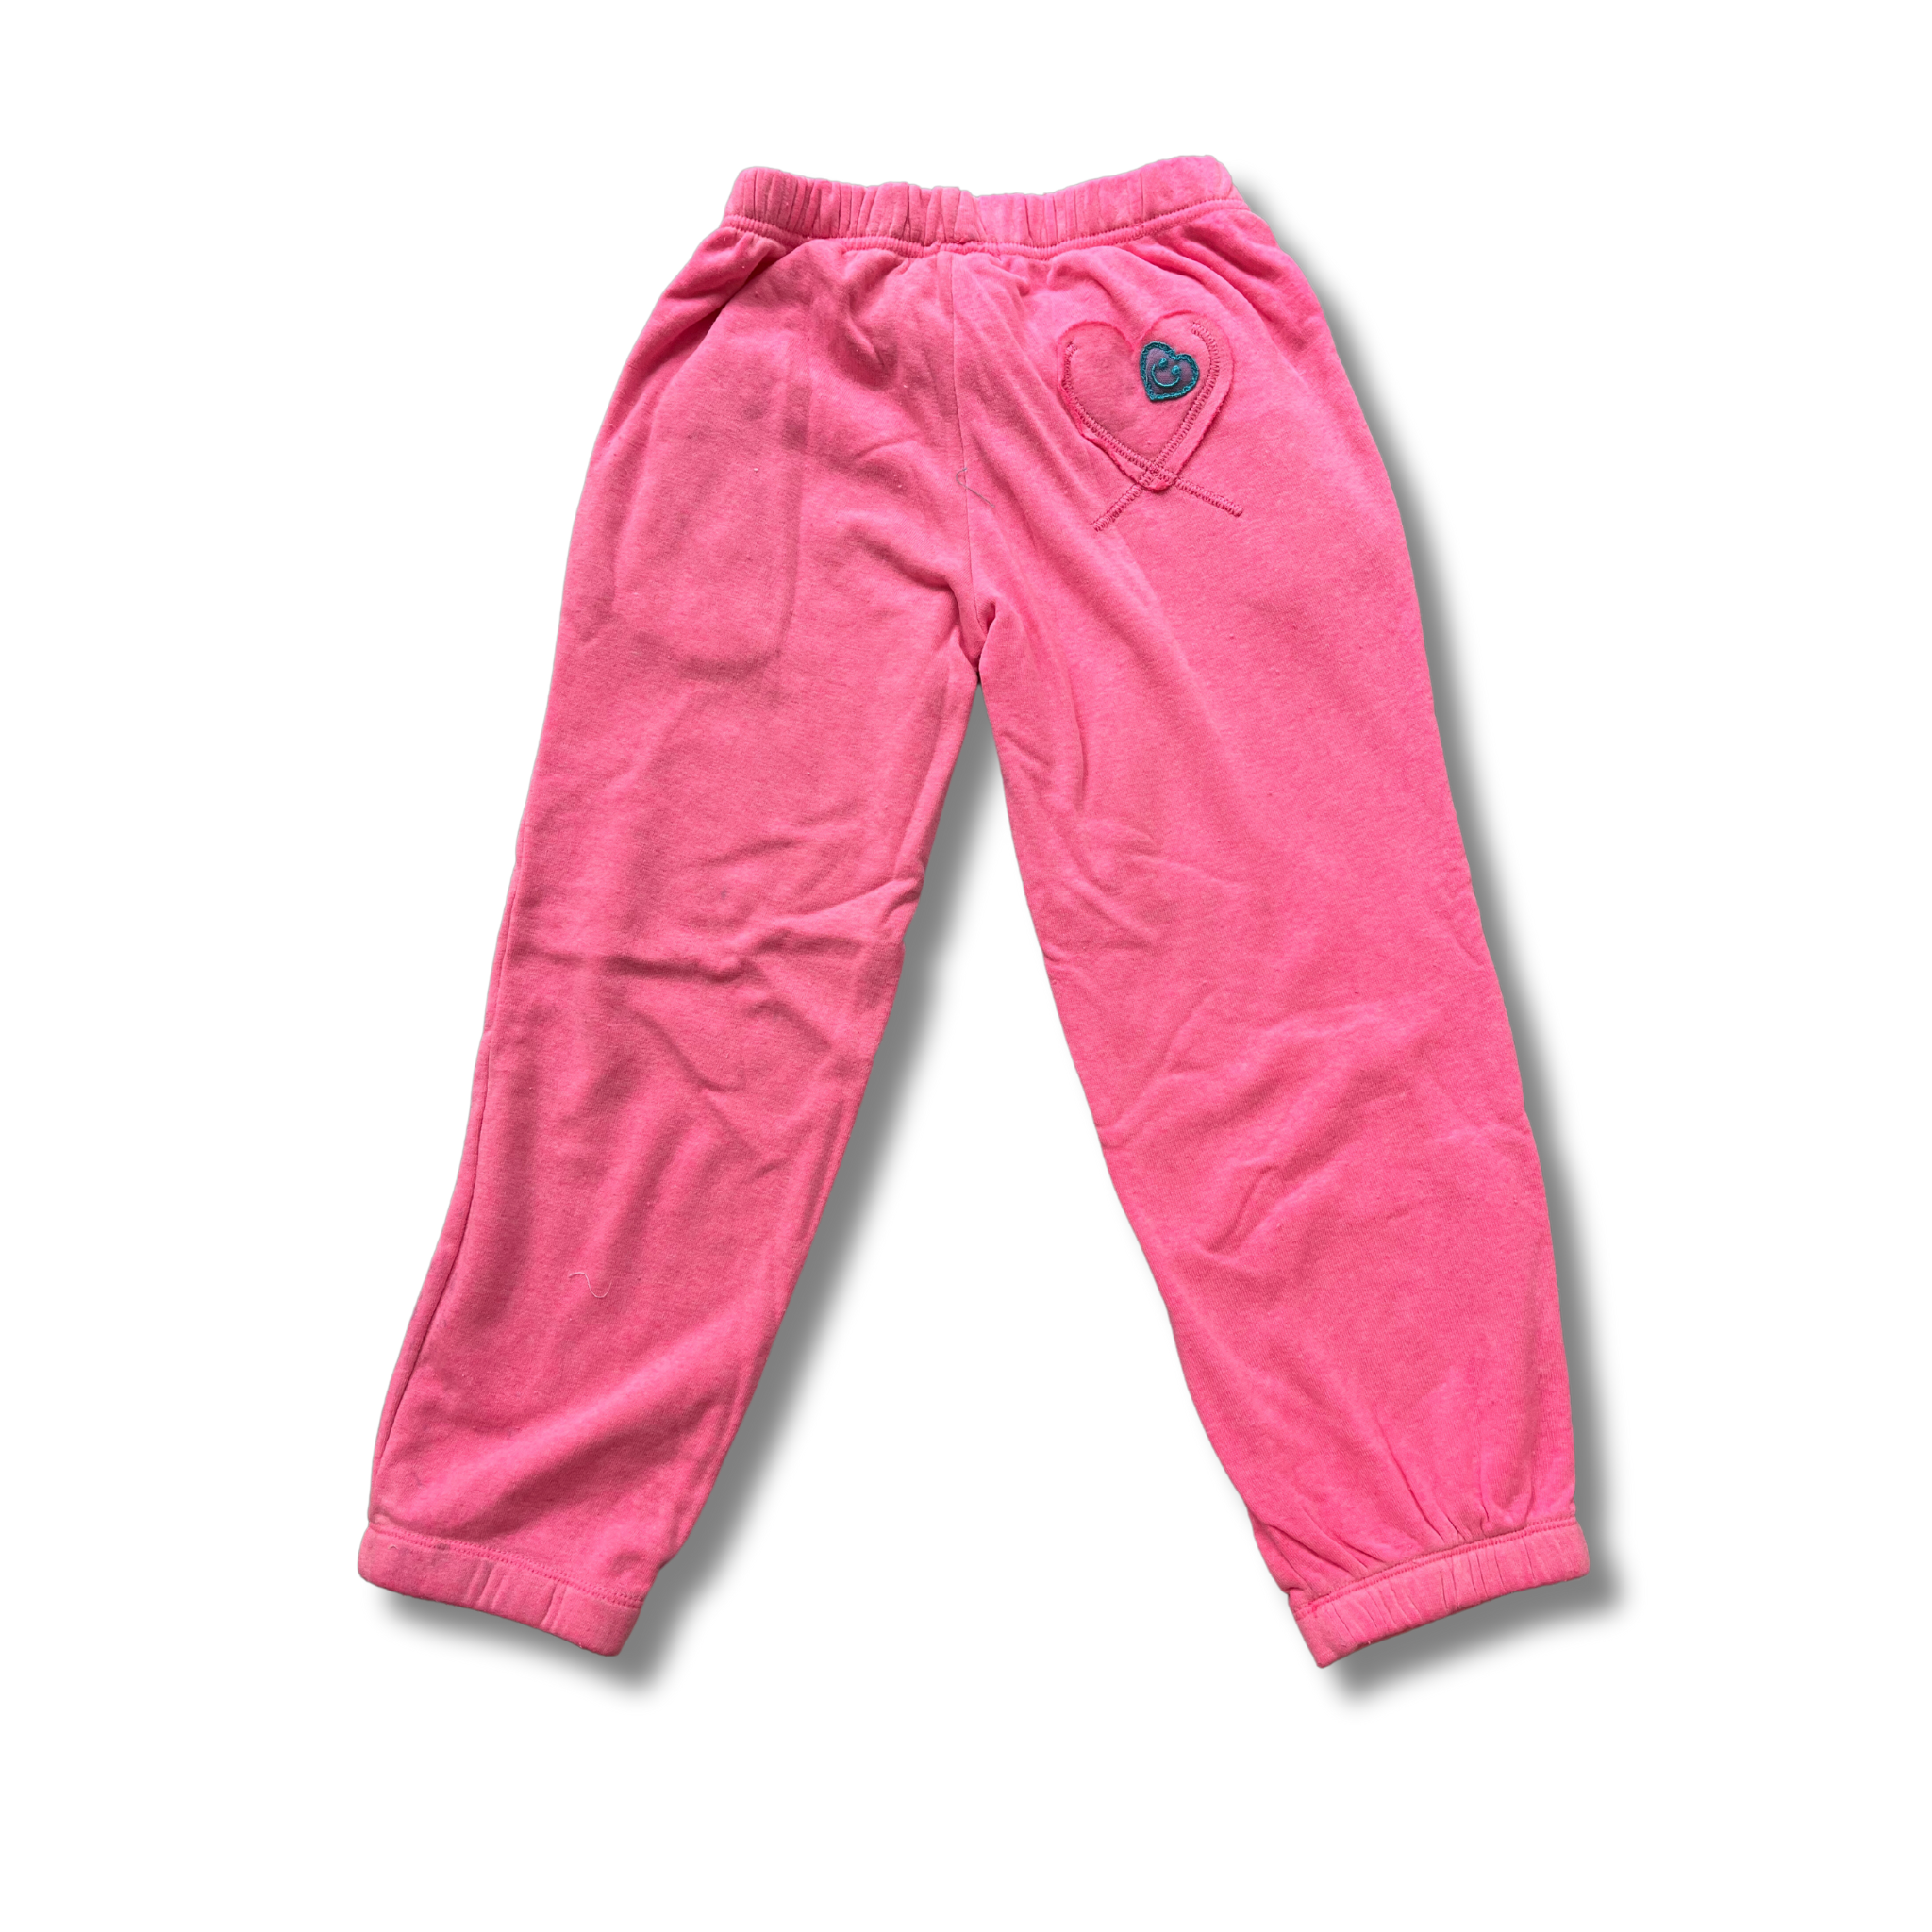 NEON PINK SWEAT PANTS – Little Miss Matched